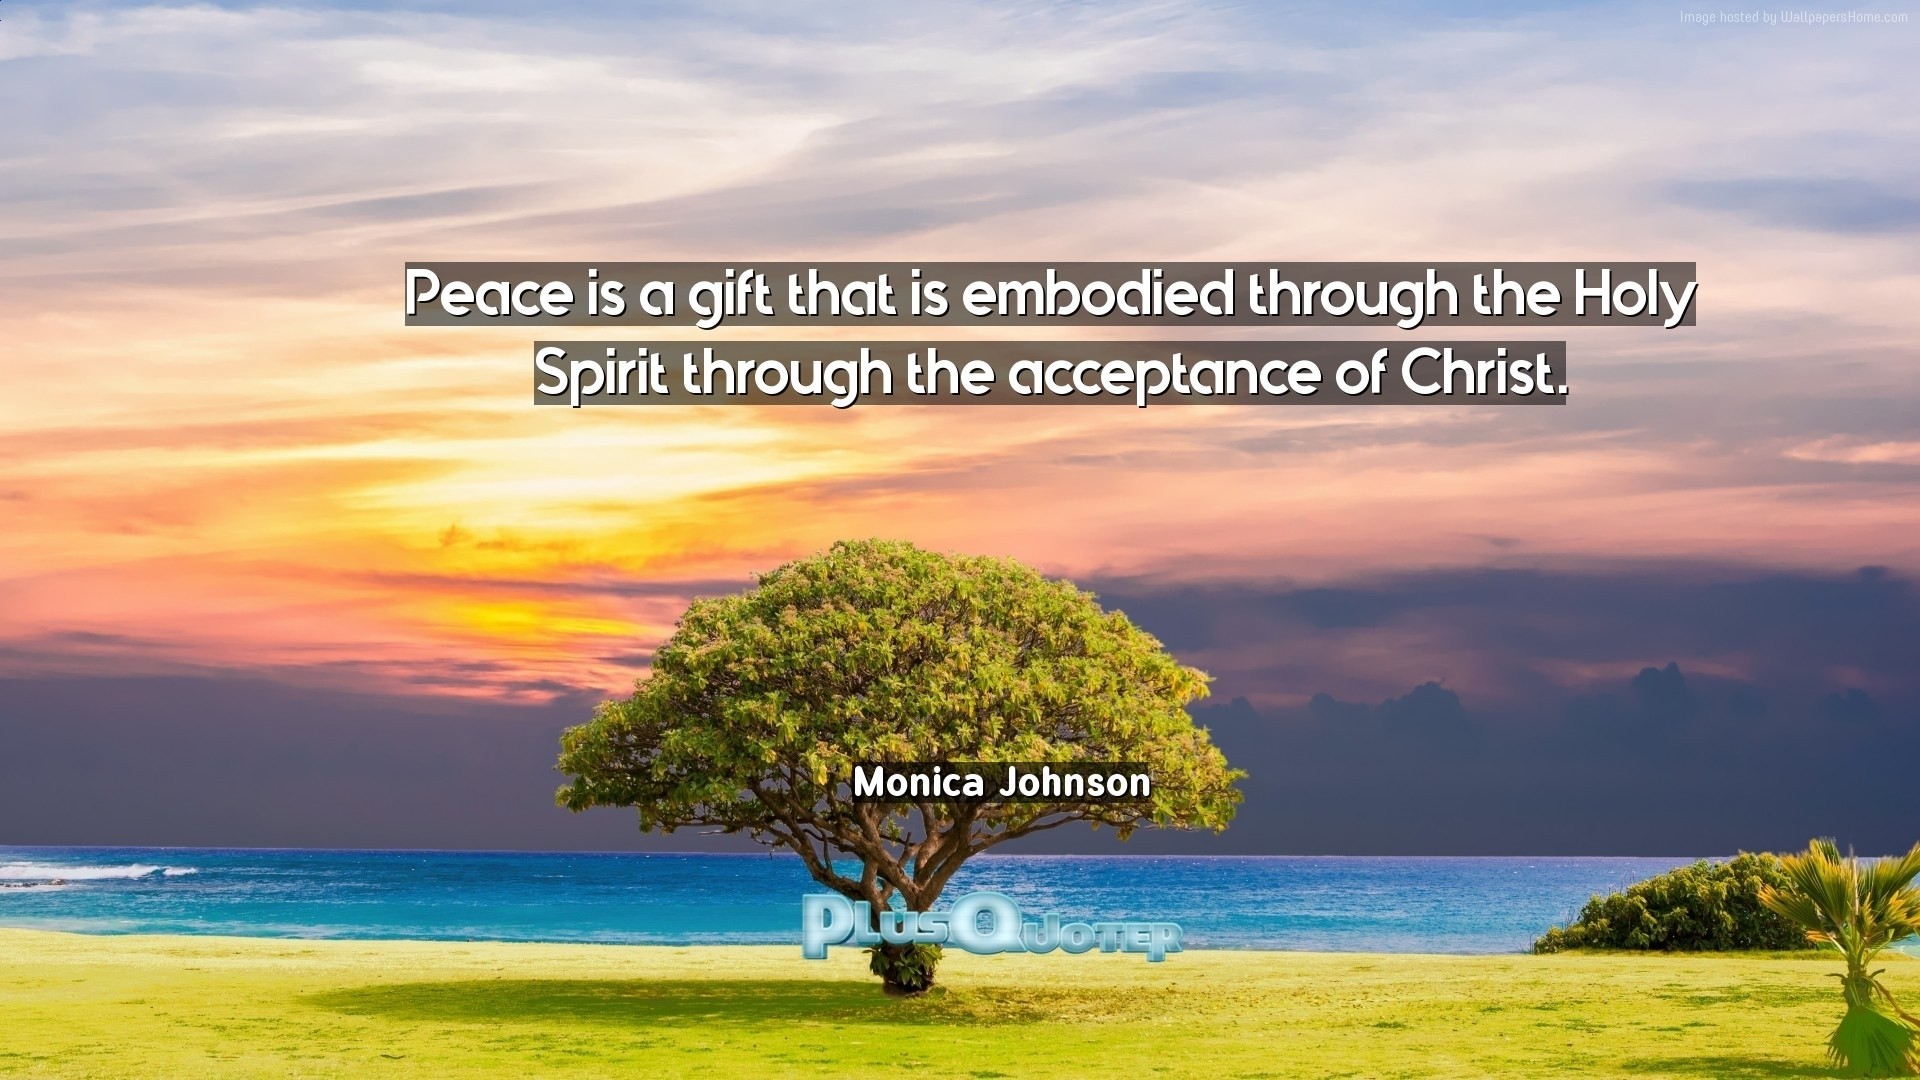 1920x1080 Download Wallpaper with inspirational Quotes- "Peace is a gift that is  embodied through the